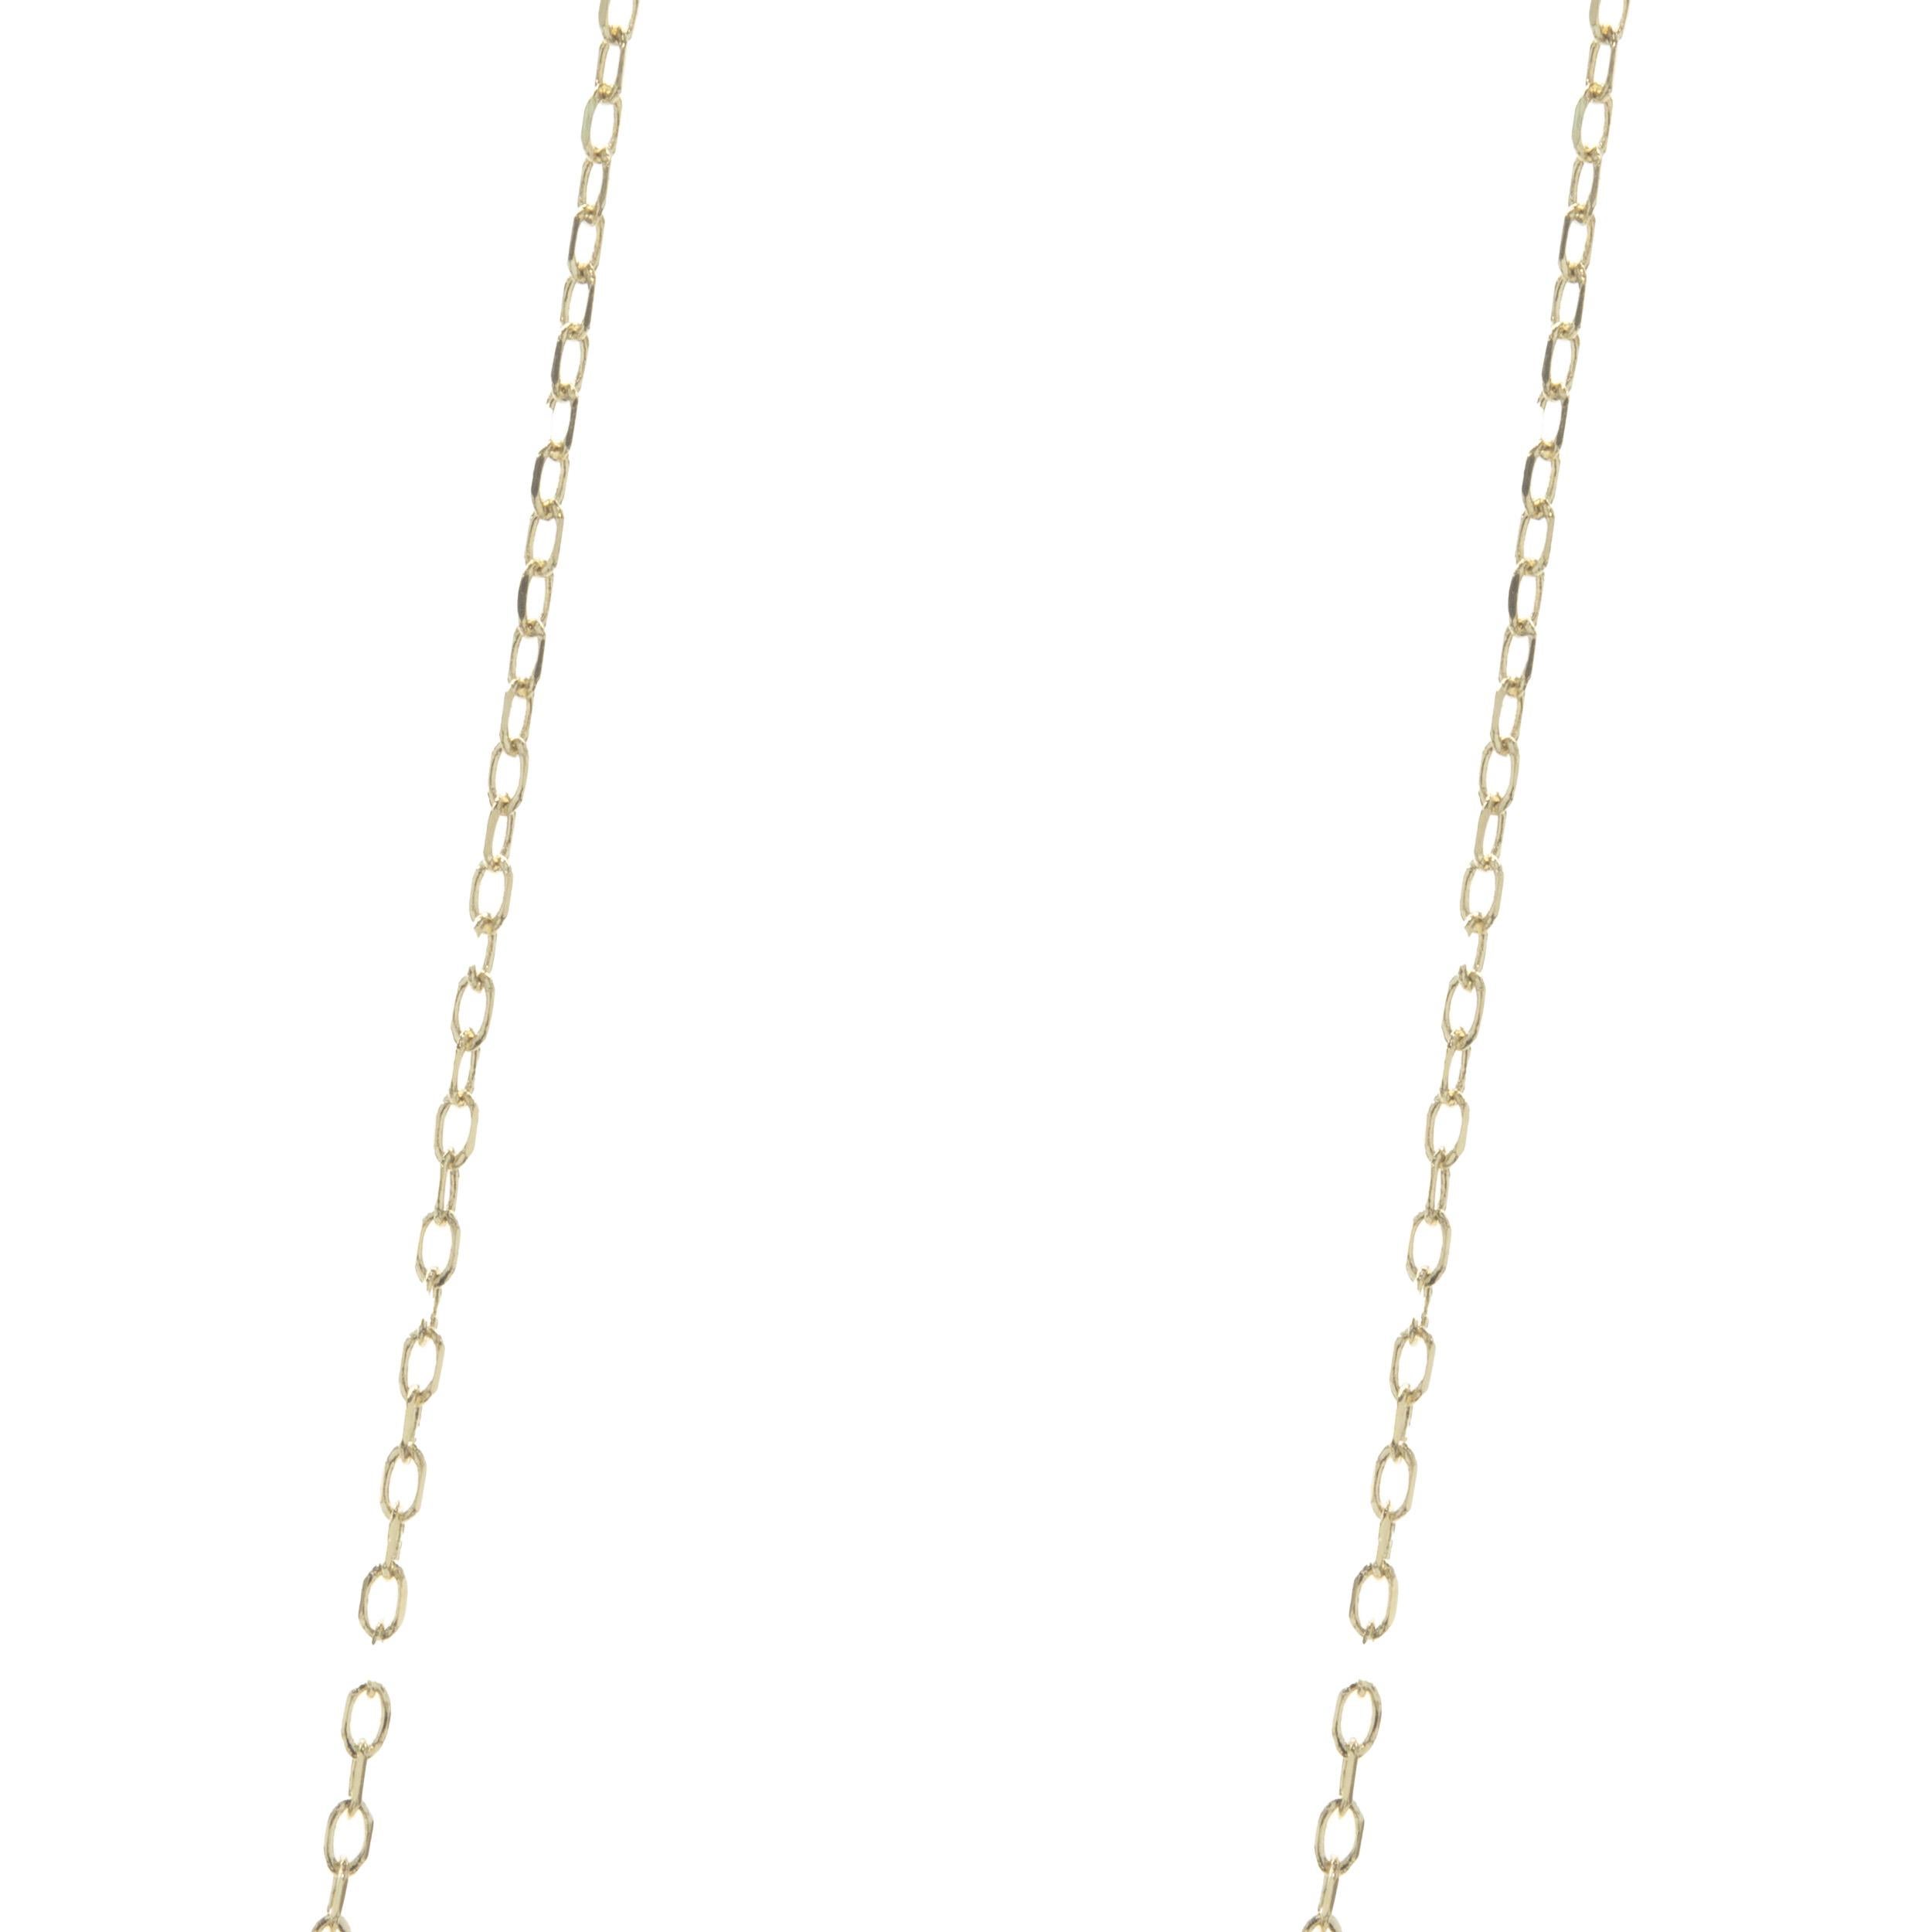 Designer: custom
Material: 14K yellow gold
Dimensions: necklace measures 15.5-inches in length
Weight: 1.30 grams